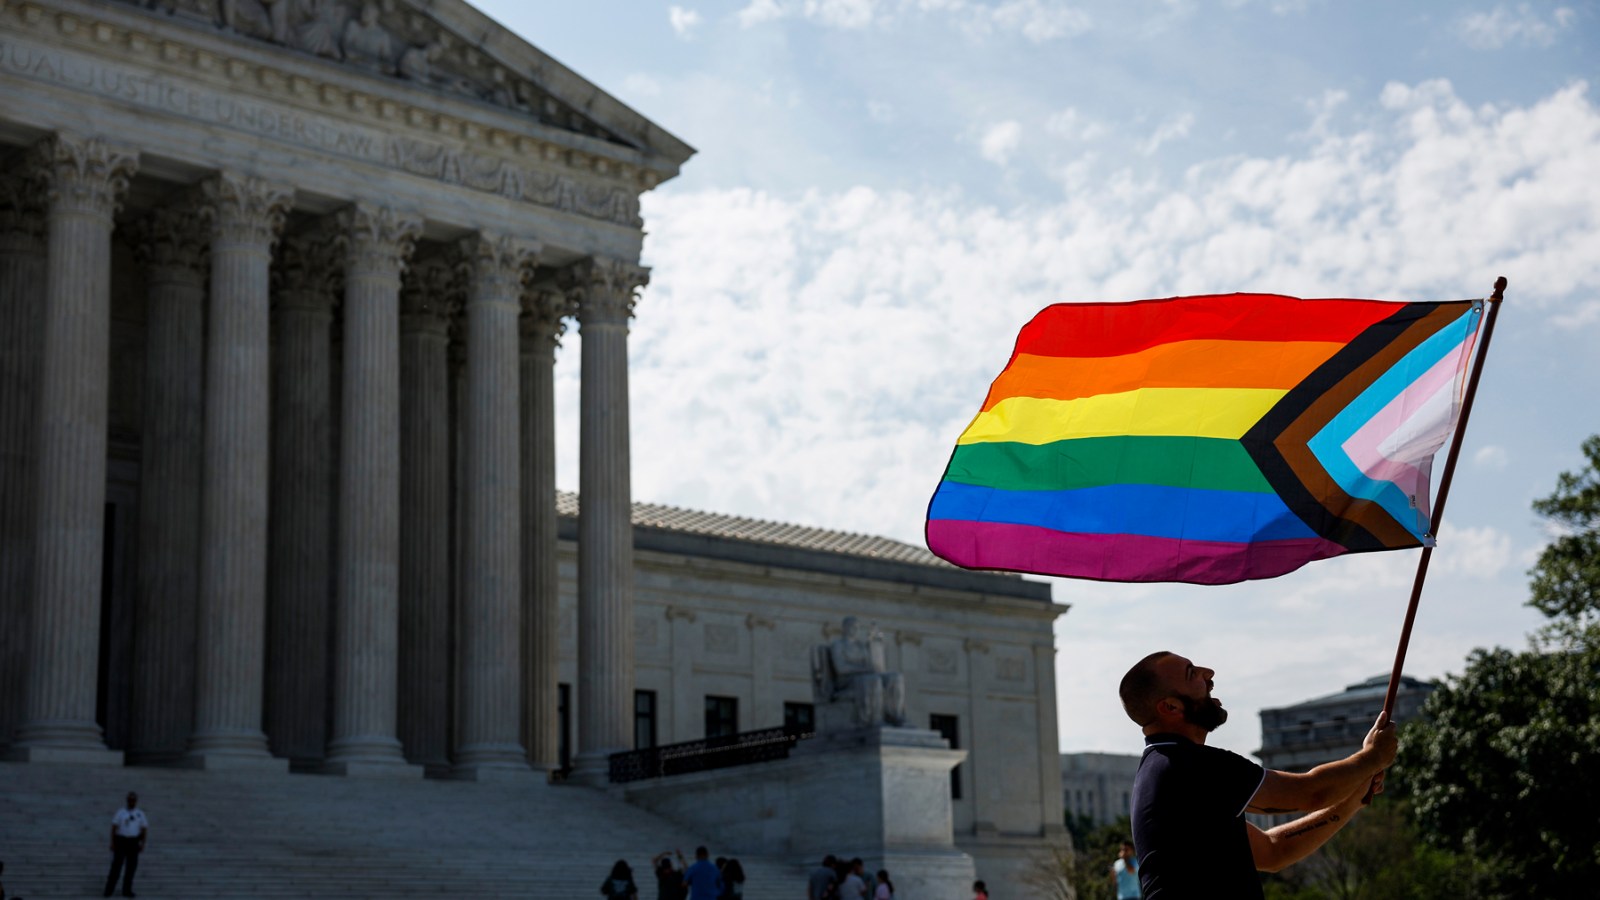 Supreme Court to Decide Whether Gender-Affirming Care Bans Are Constitutional